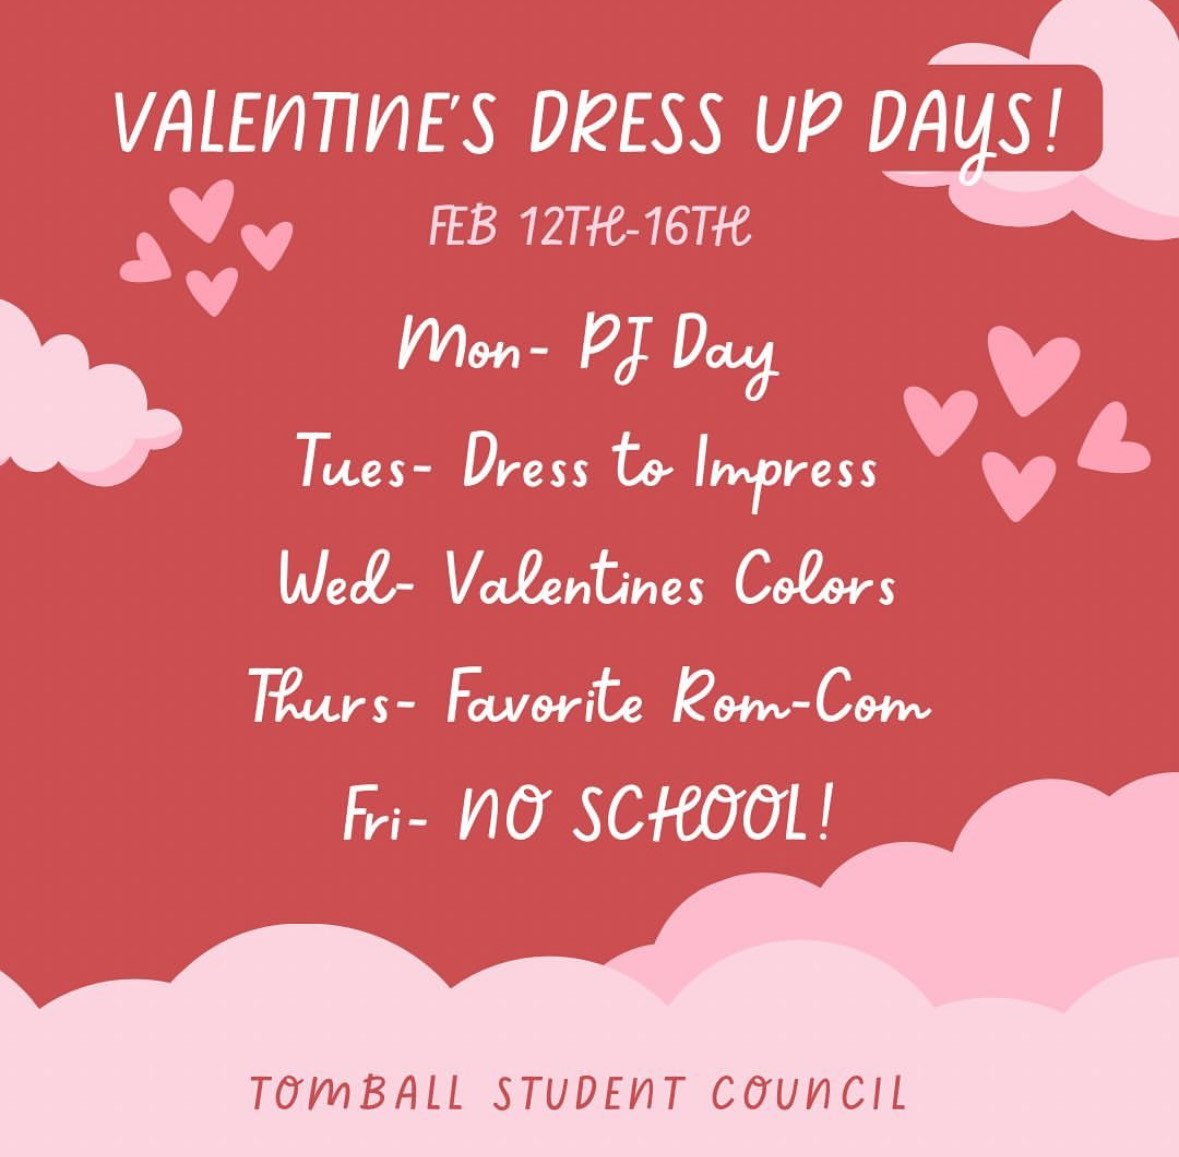 Show the love of Valentines Day